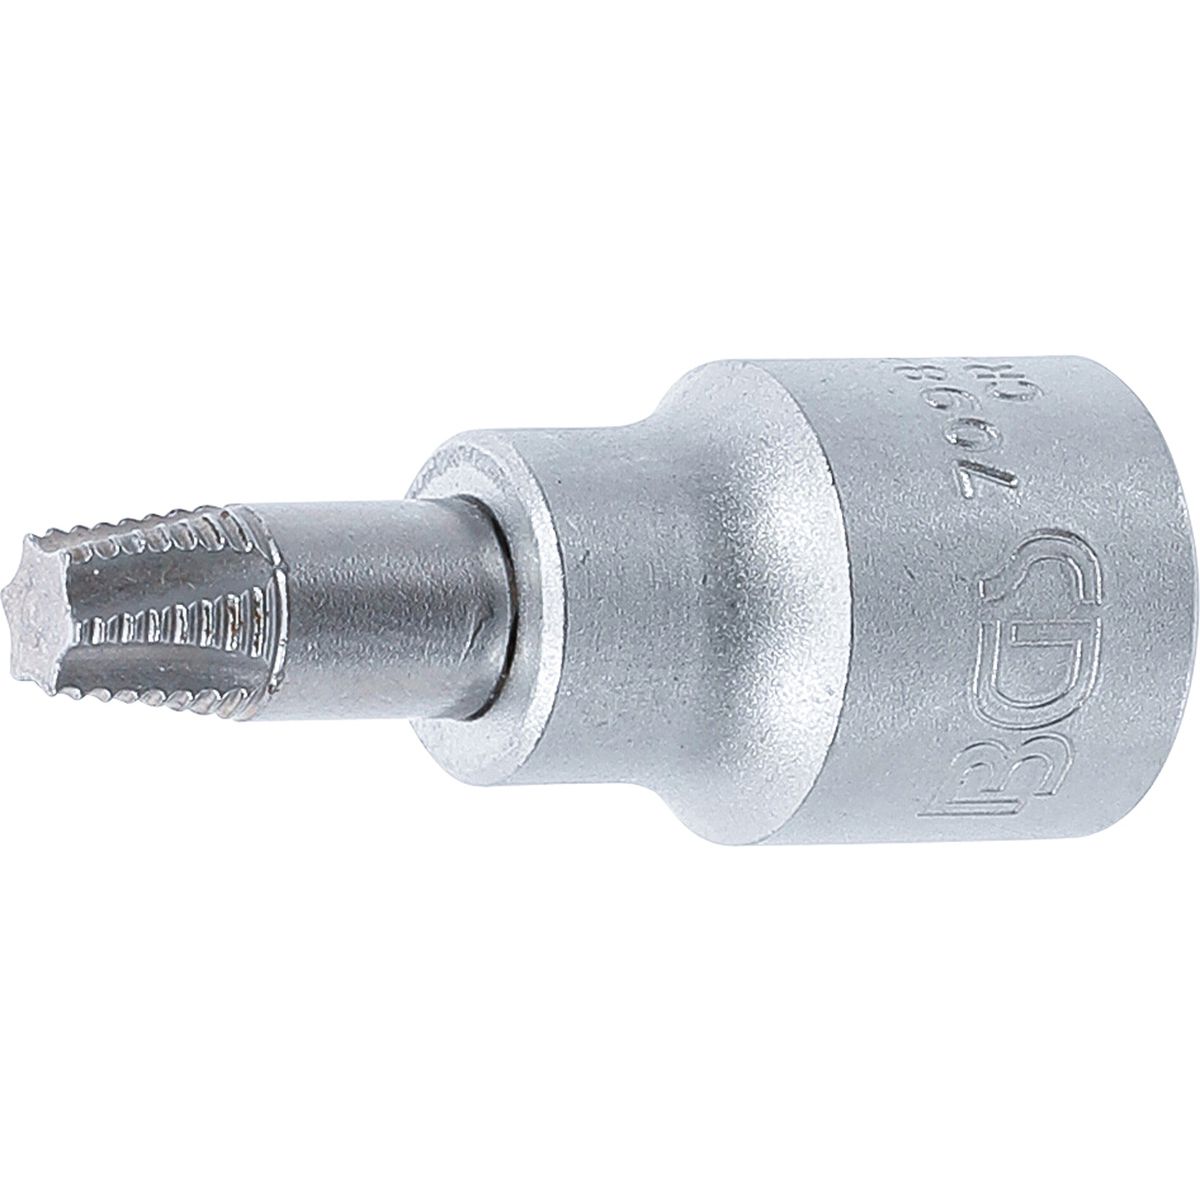 Screw Extractor Bit Socket | 10 mm (3/8") Drive | for damaged T-Star (for Torx) T40